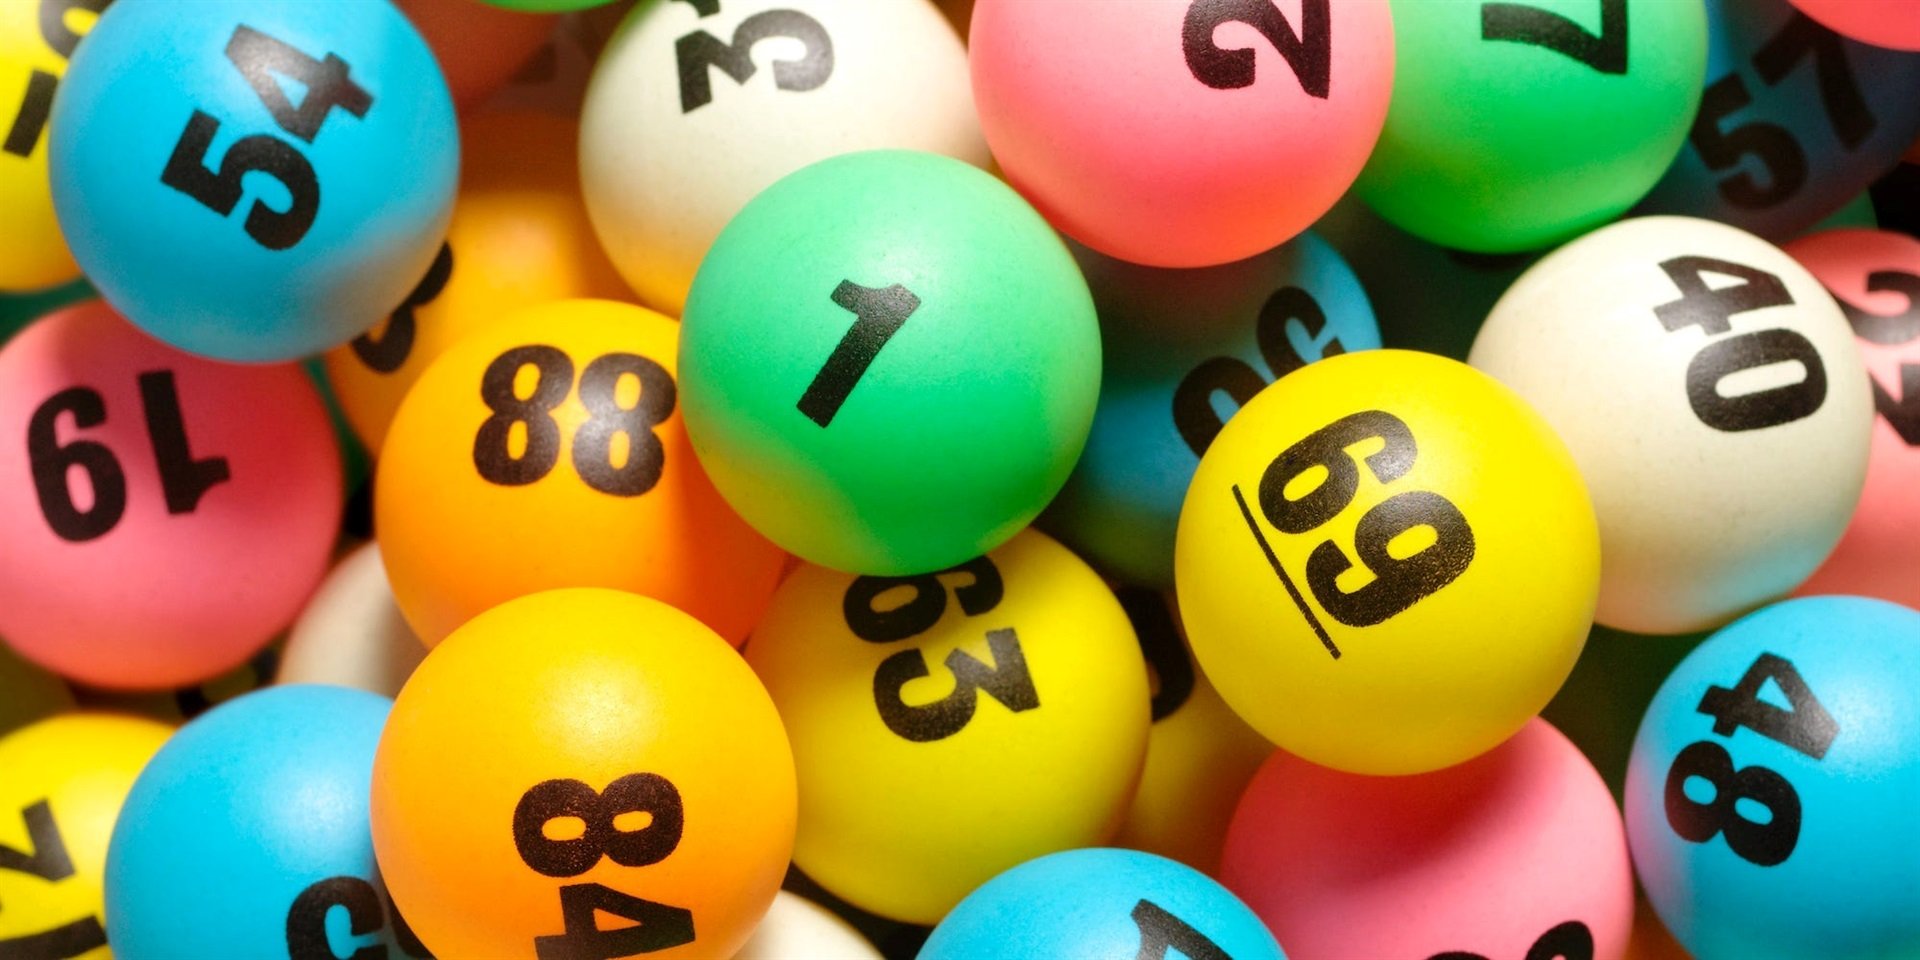 A lucky Western Cape resident is almost R43 million richer after winning a recent LOTTO jackpot